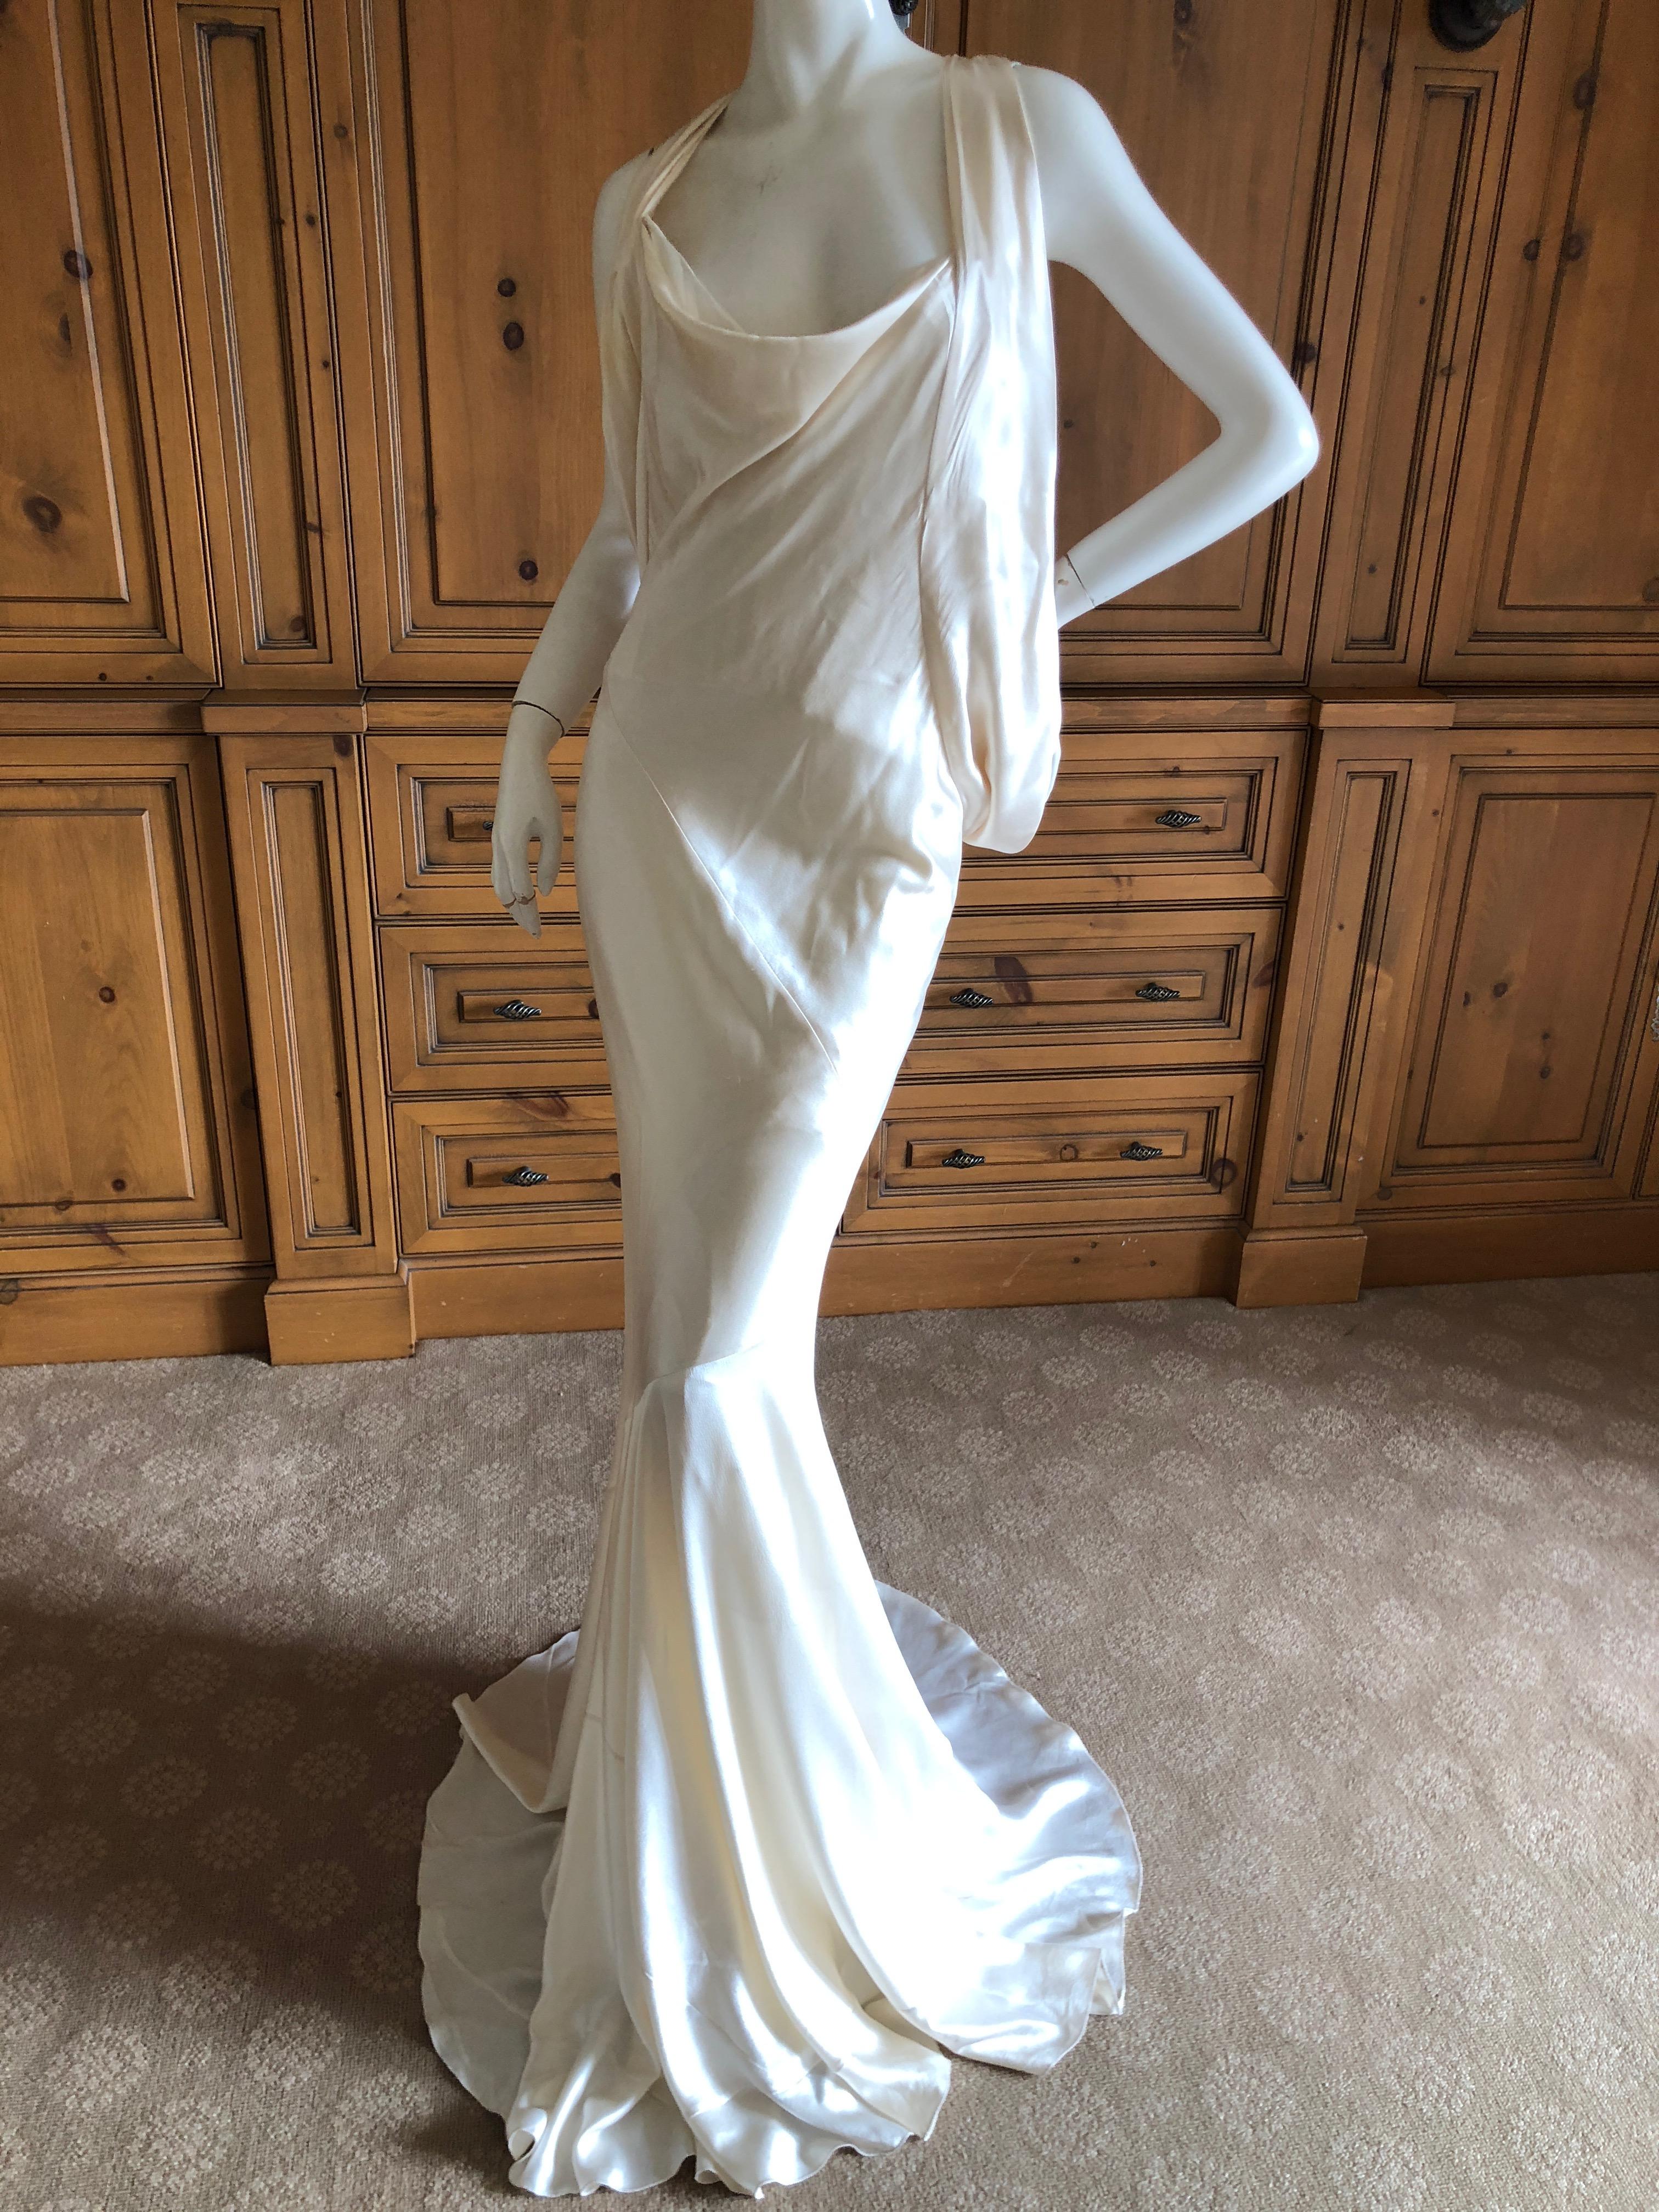  Alexander McQueen Daring Ivory Duchesse Silk Satin Evening or Wedding Dress
This is so beautiful, with a full inner corset that is exposed.
Size 44 seems to be cut quite generously.
 Bust 38